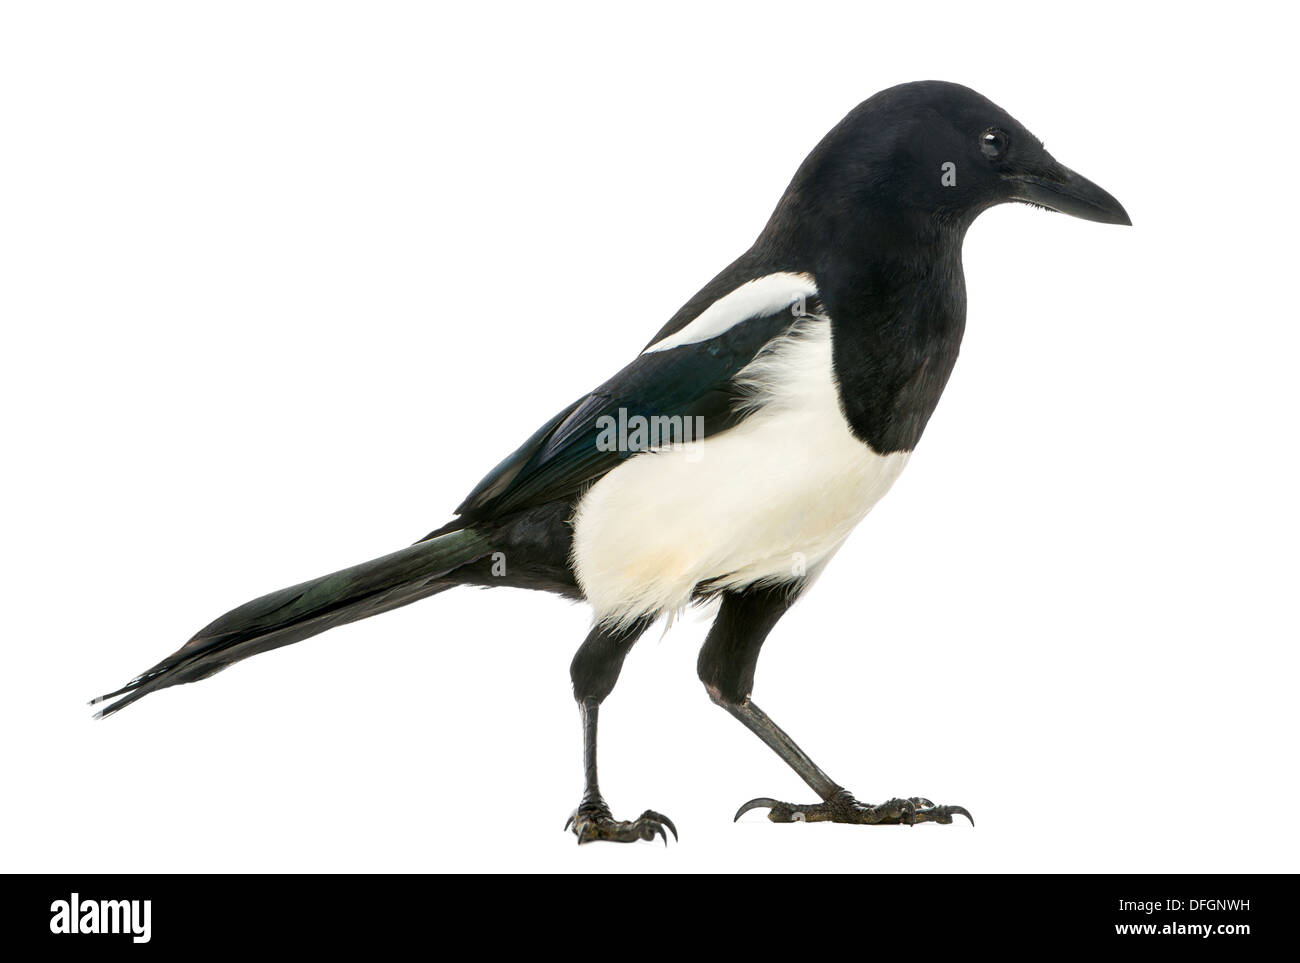 Magpie commune, Pica pica, against white background Banque D'Images